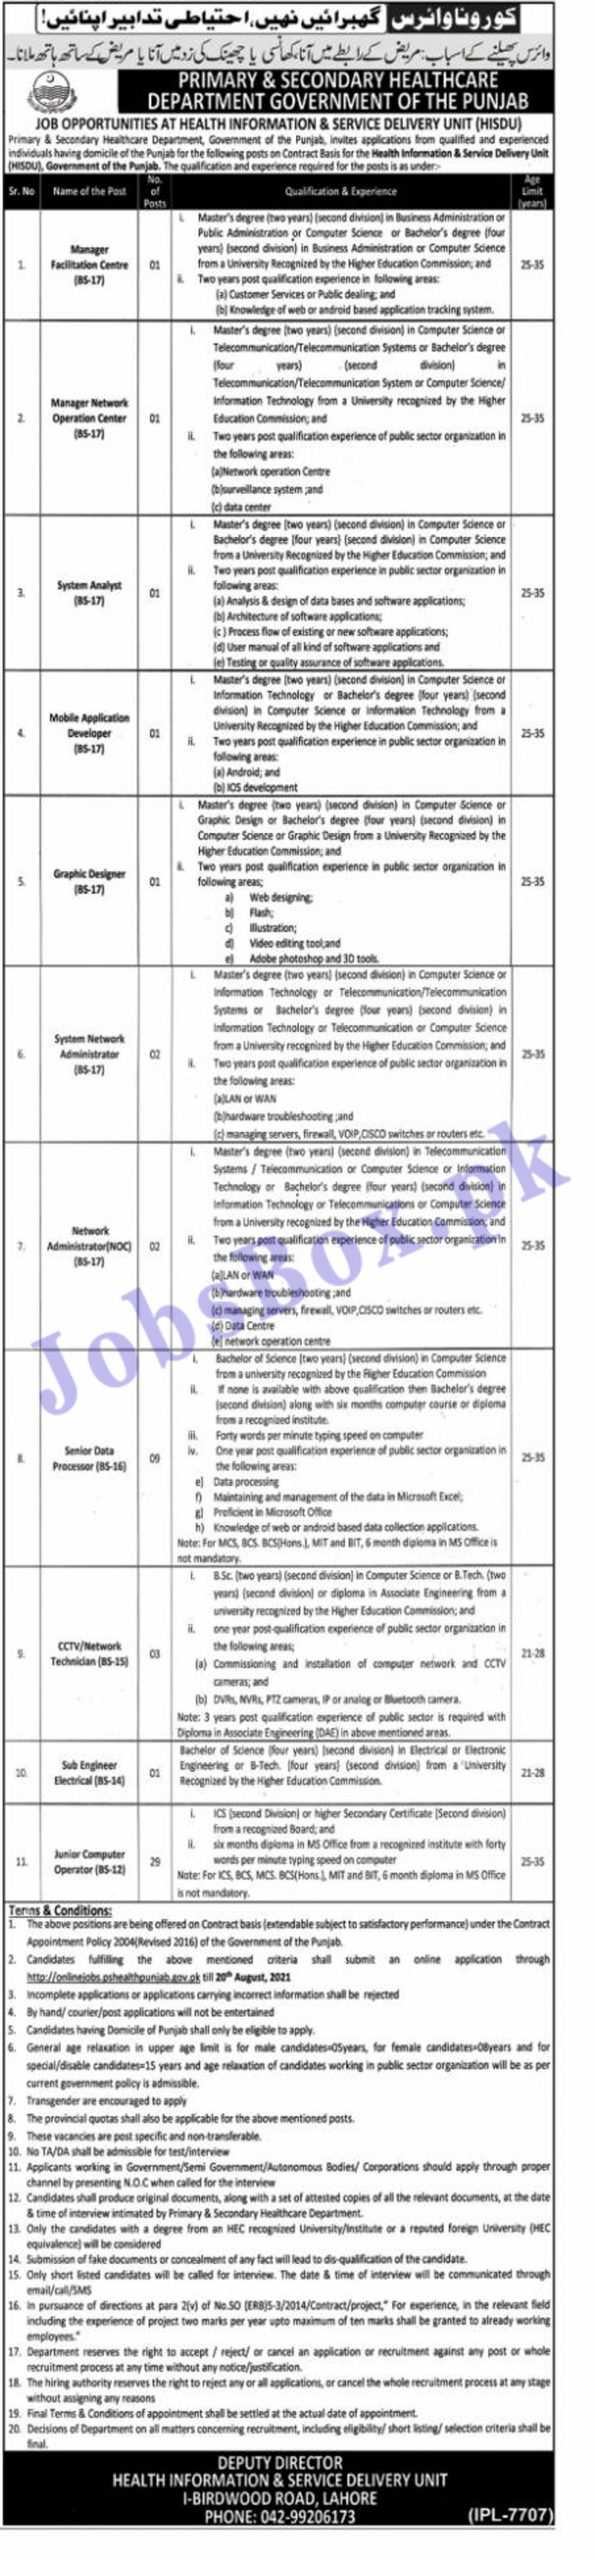 Primary and Secondary Healthcare Department Punjab Jobs 2021